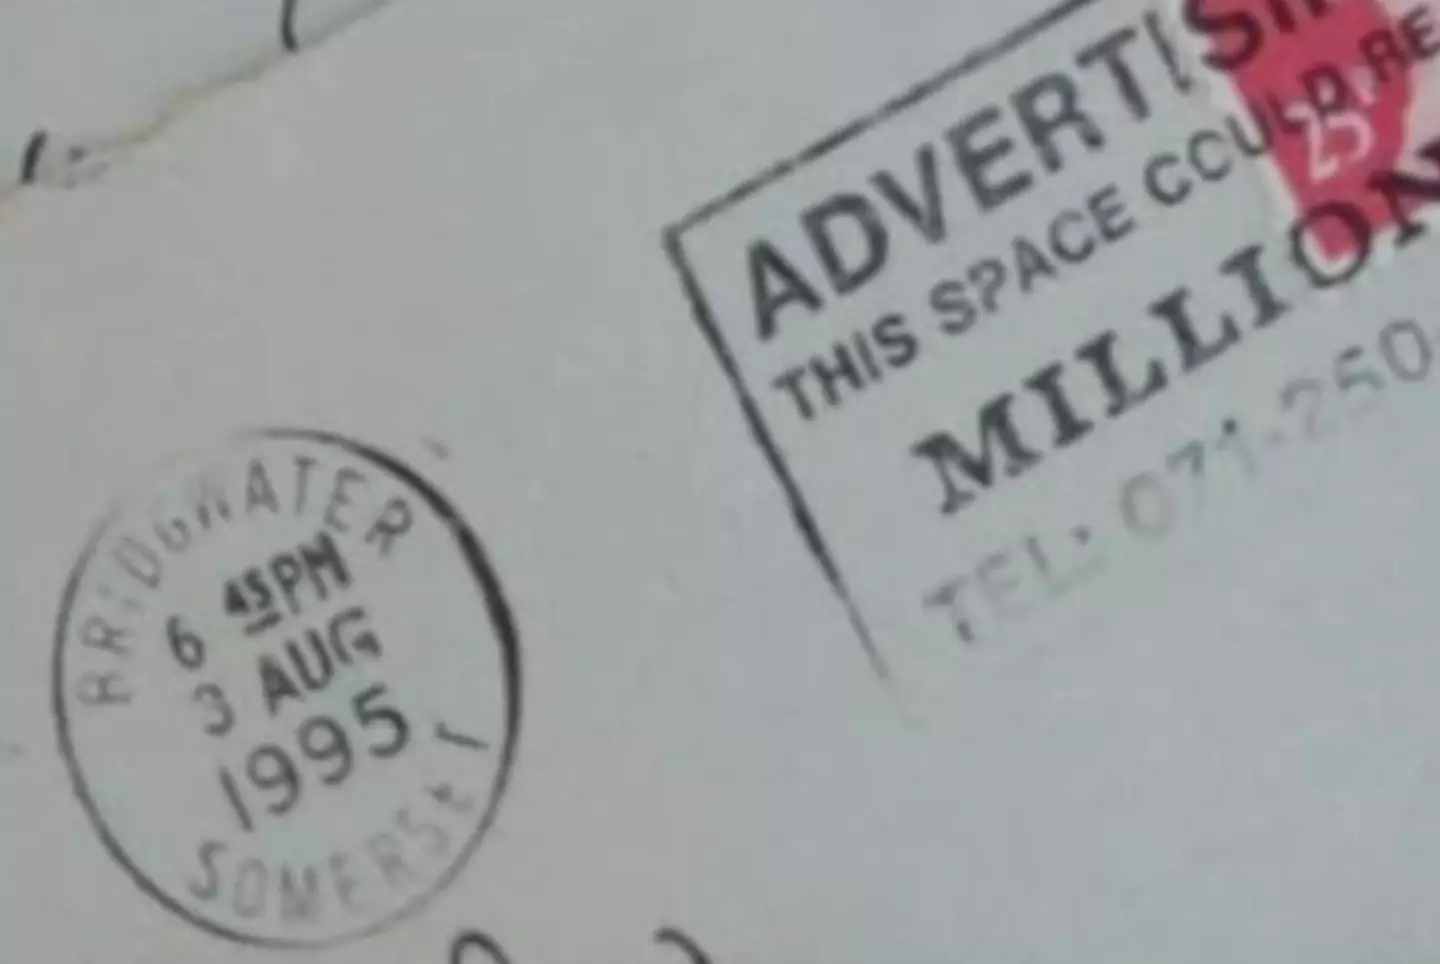 The postage stamp revealed the letter was from 1995.